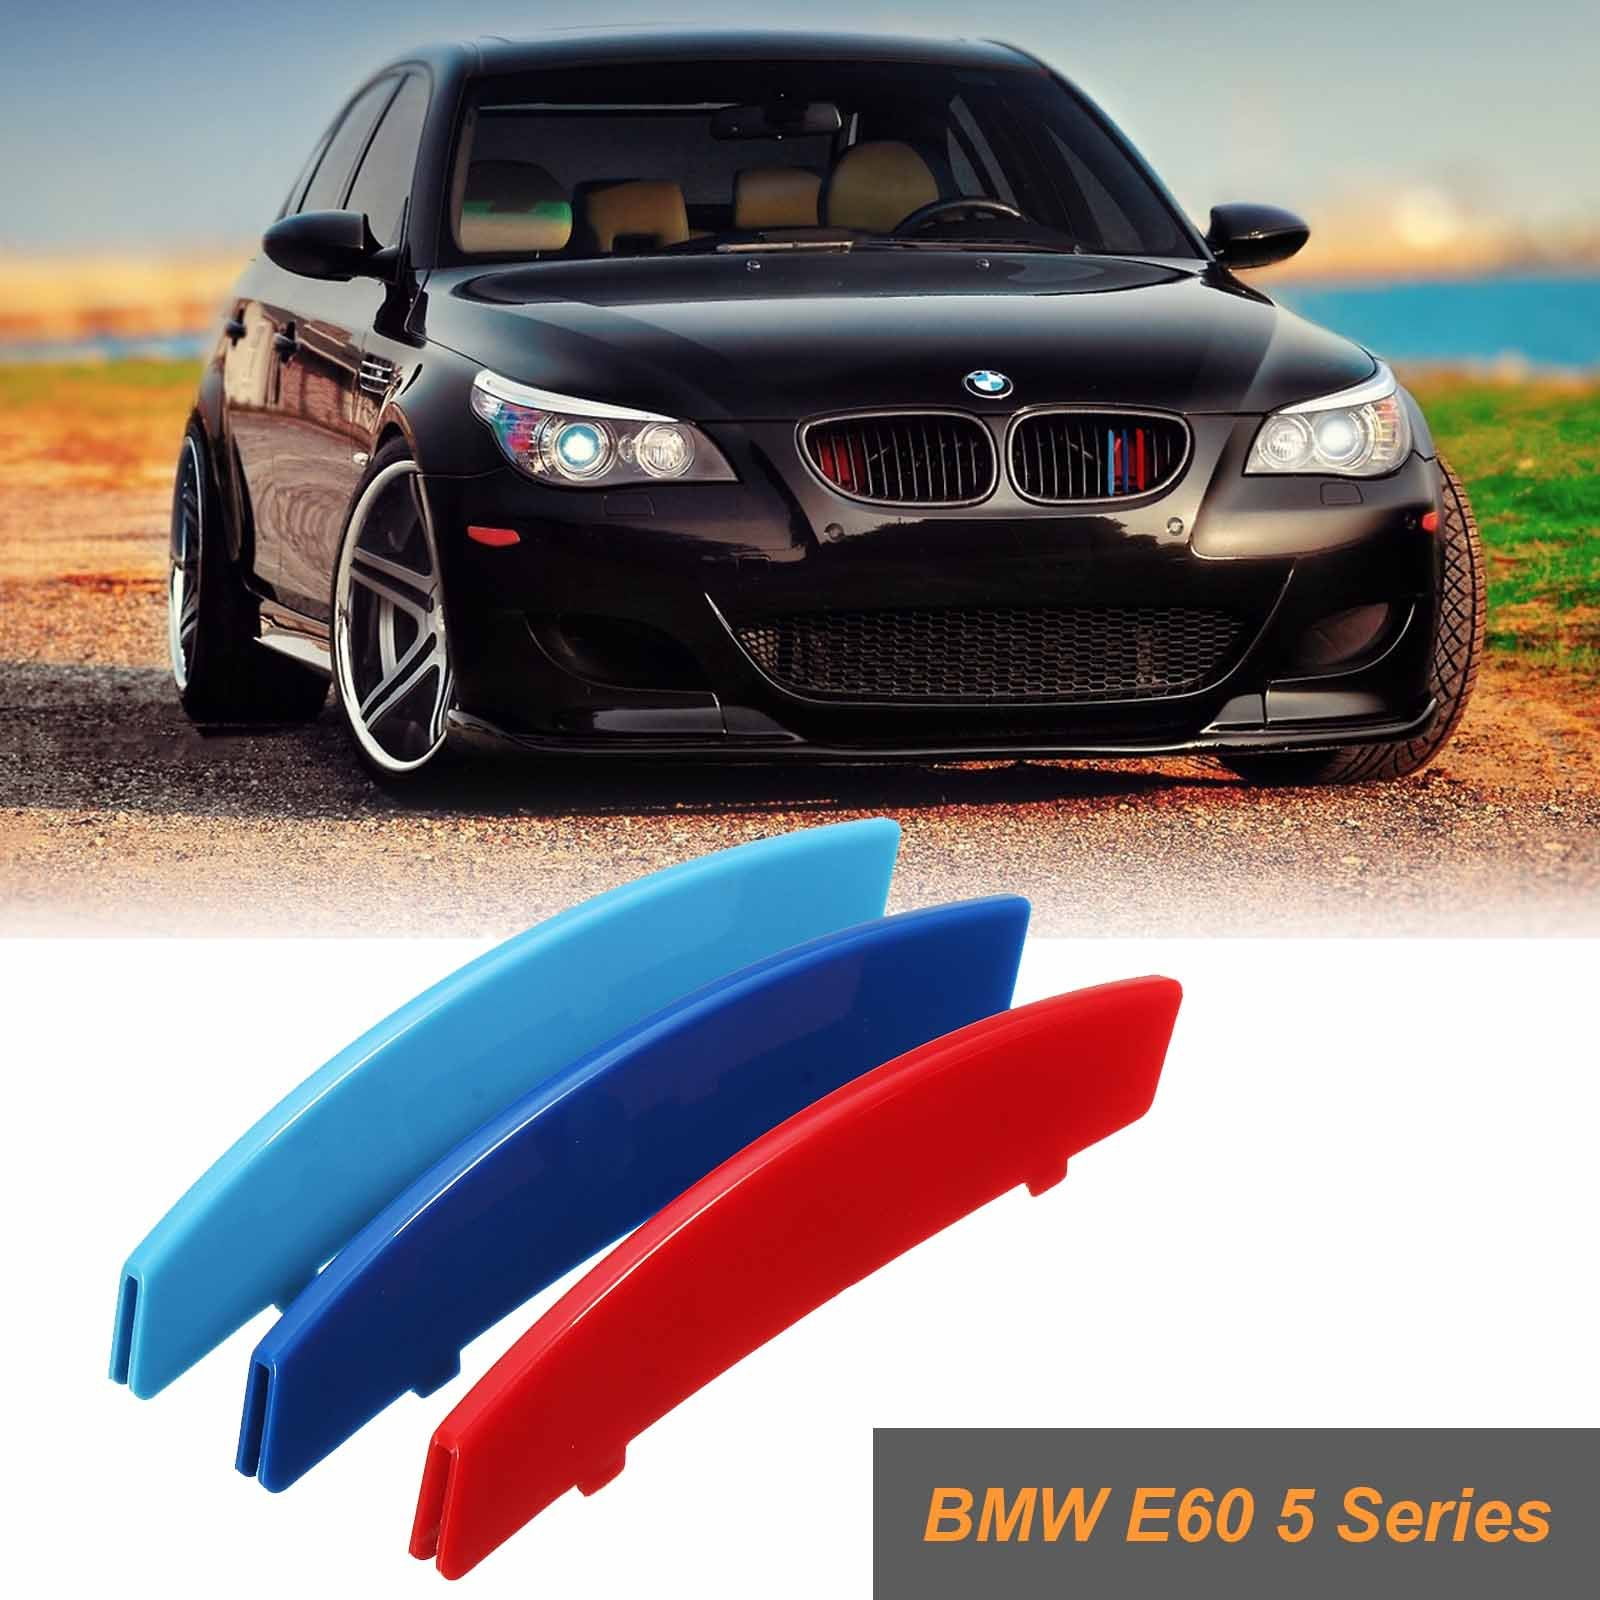 Front Grille Trim Strips For BMW 5 Series E60 2004-2010（11 Grilles）Inserts Kidney Grill Covers 3D M Decor Stickers 3Pcs